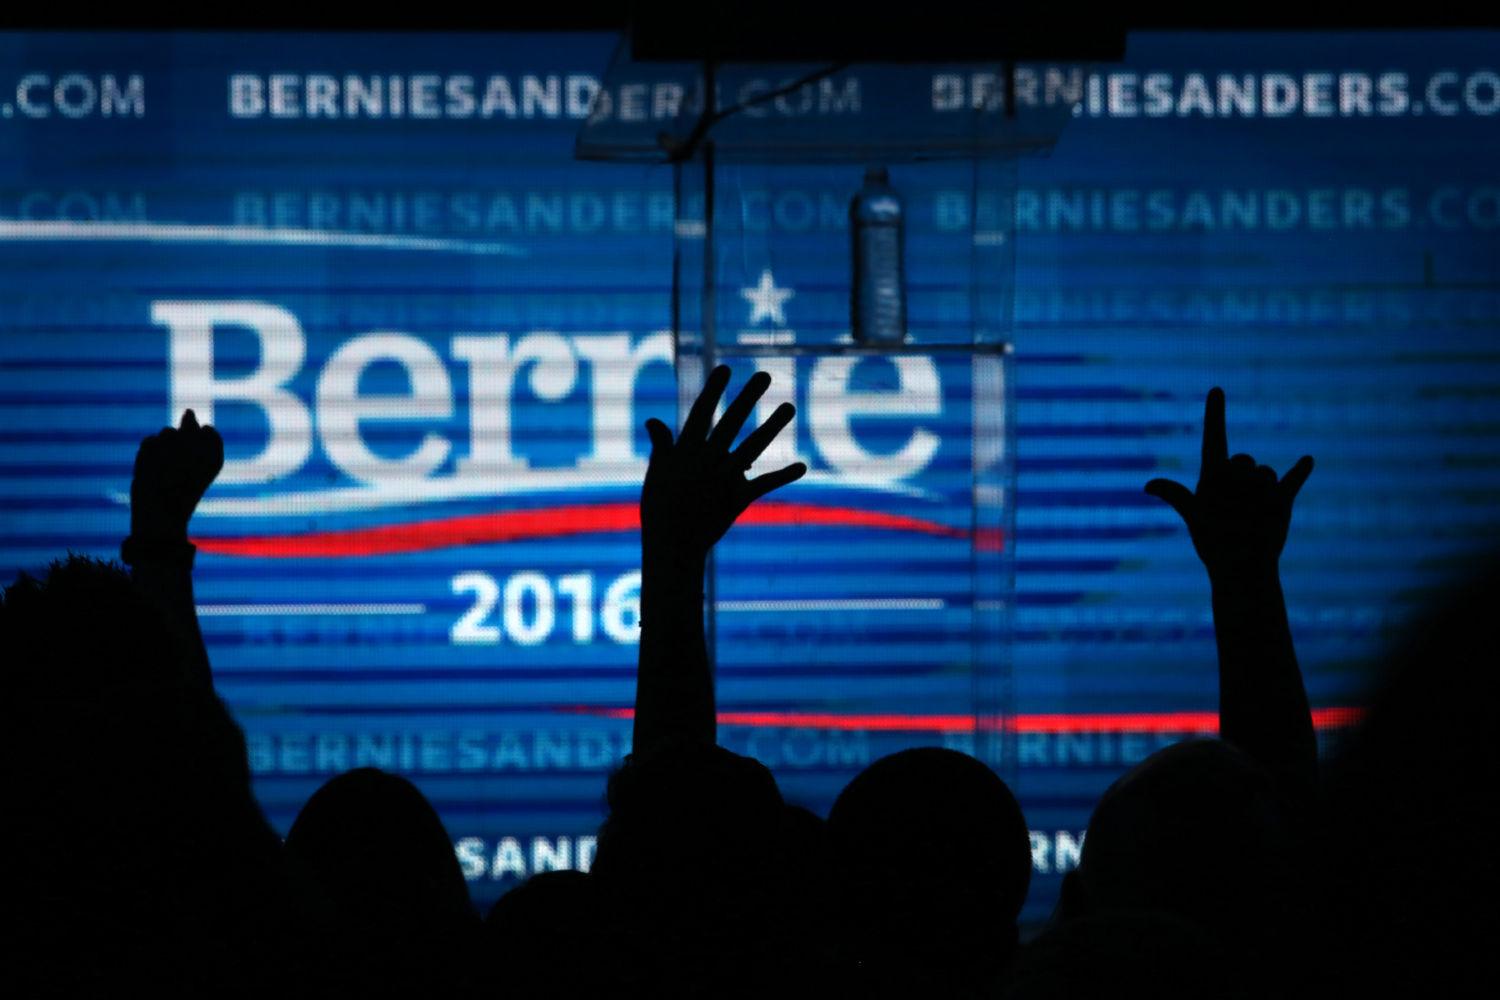 The crowd cheers as then-Democratic presidential candidate Bernie Sanders at the Avalon in Los Angeles for a fundraiser following the campaign's first debate the prior night in Las Vegas. (Rick Loomis/Los Angeles Times/TNS)